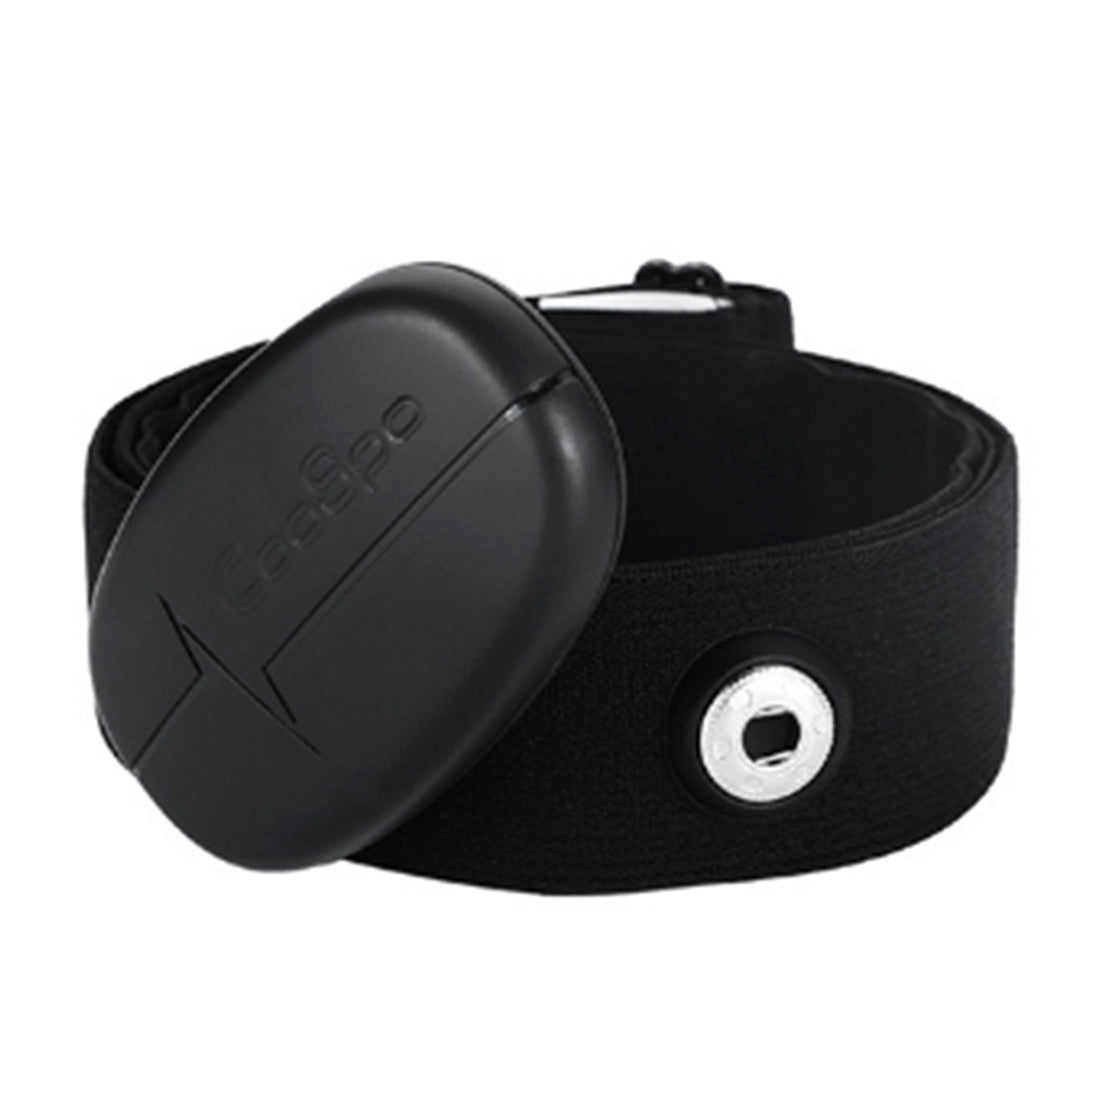 CooSpo H6 Bimodule Heartbeat Rate Chest Belt, Bluetooth and ANT+, Compatible with both Android and iOS System